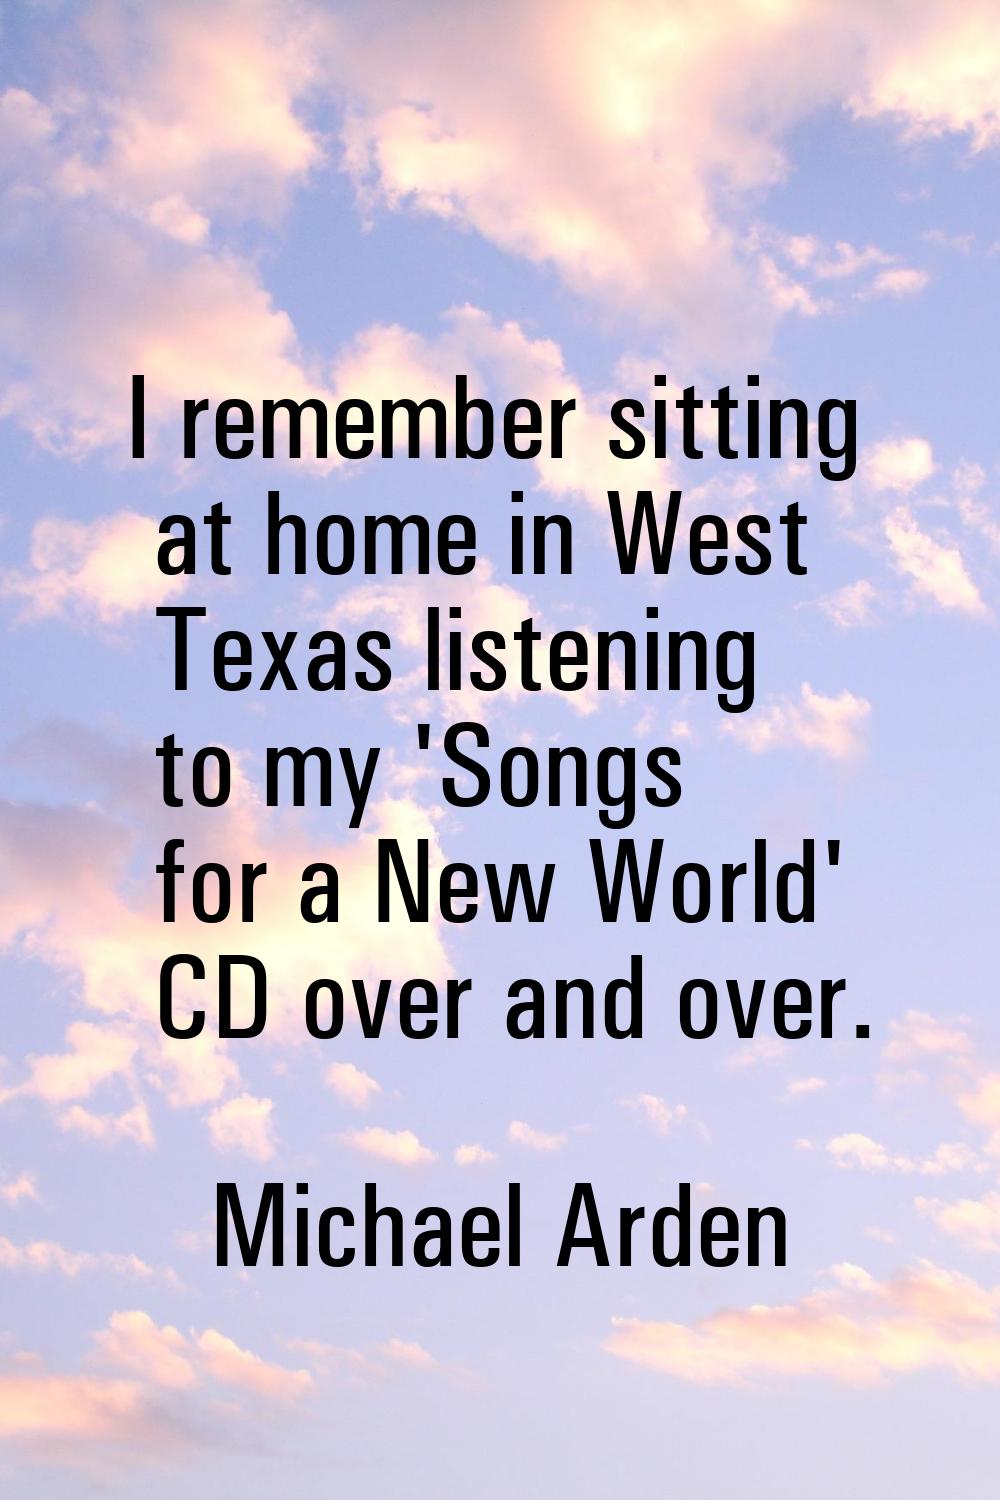 I remember sitting at home in West Texas listening to my 'Songs for a New World' CD over and over.